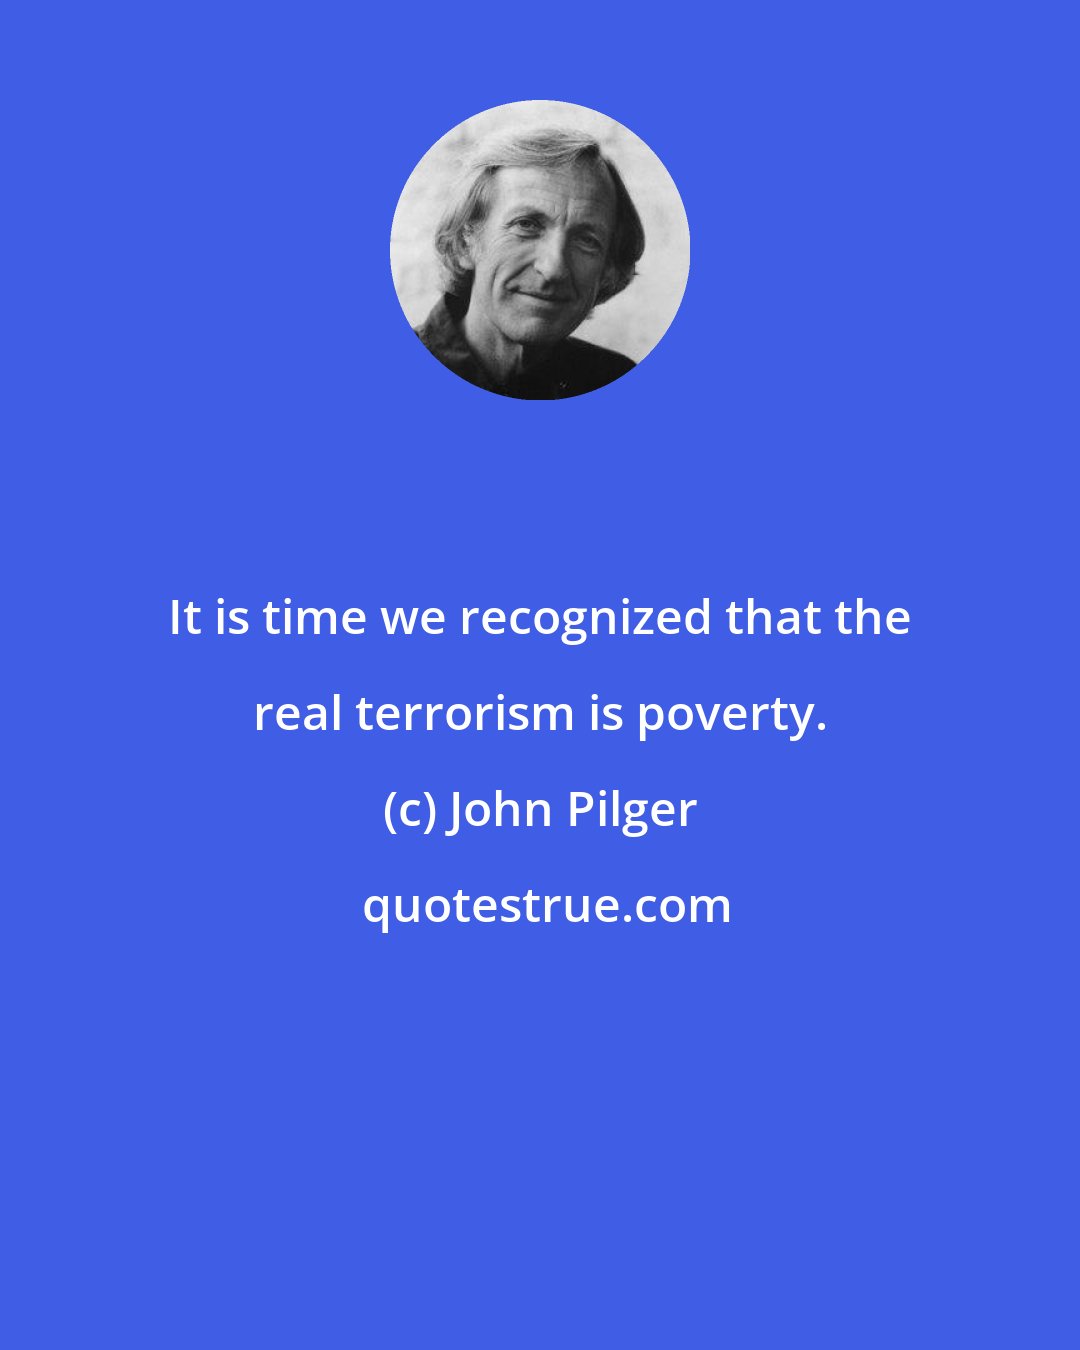 John Pilger: It is time we recognized that the real terrorism is poverty.